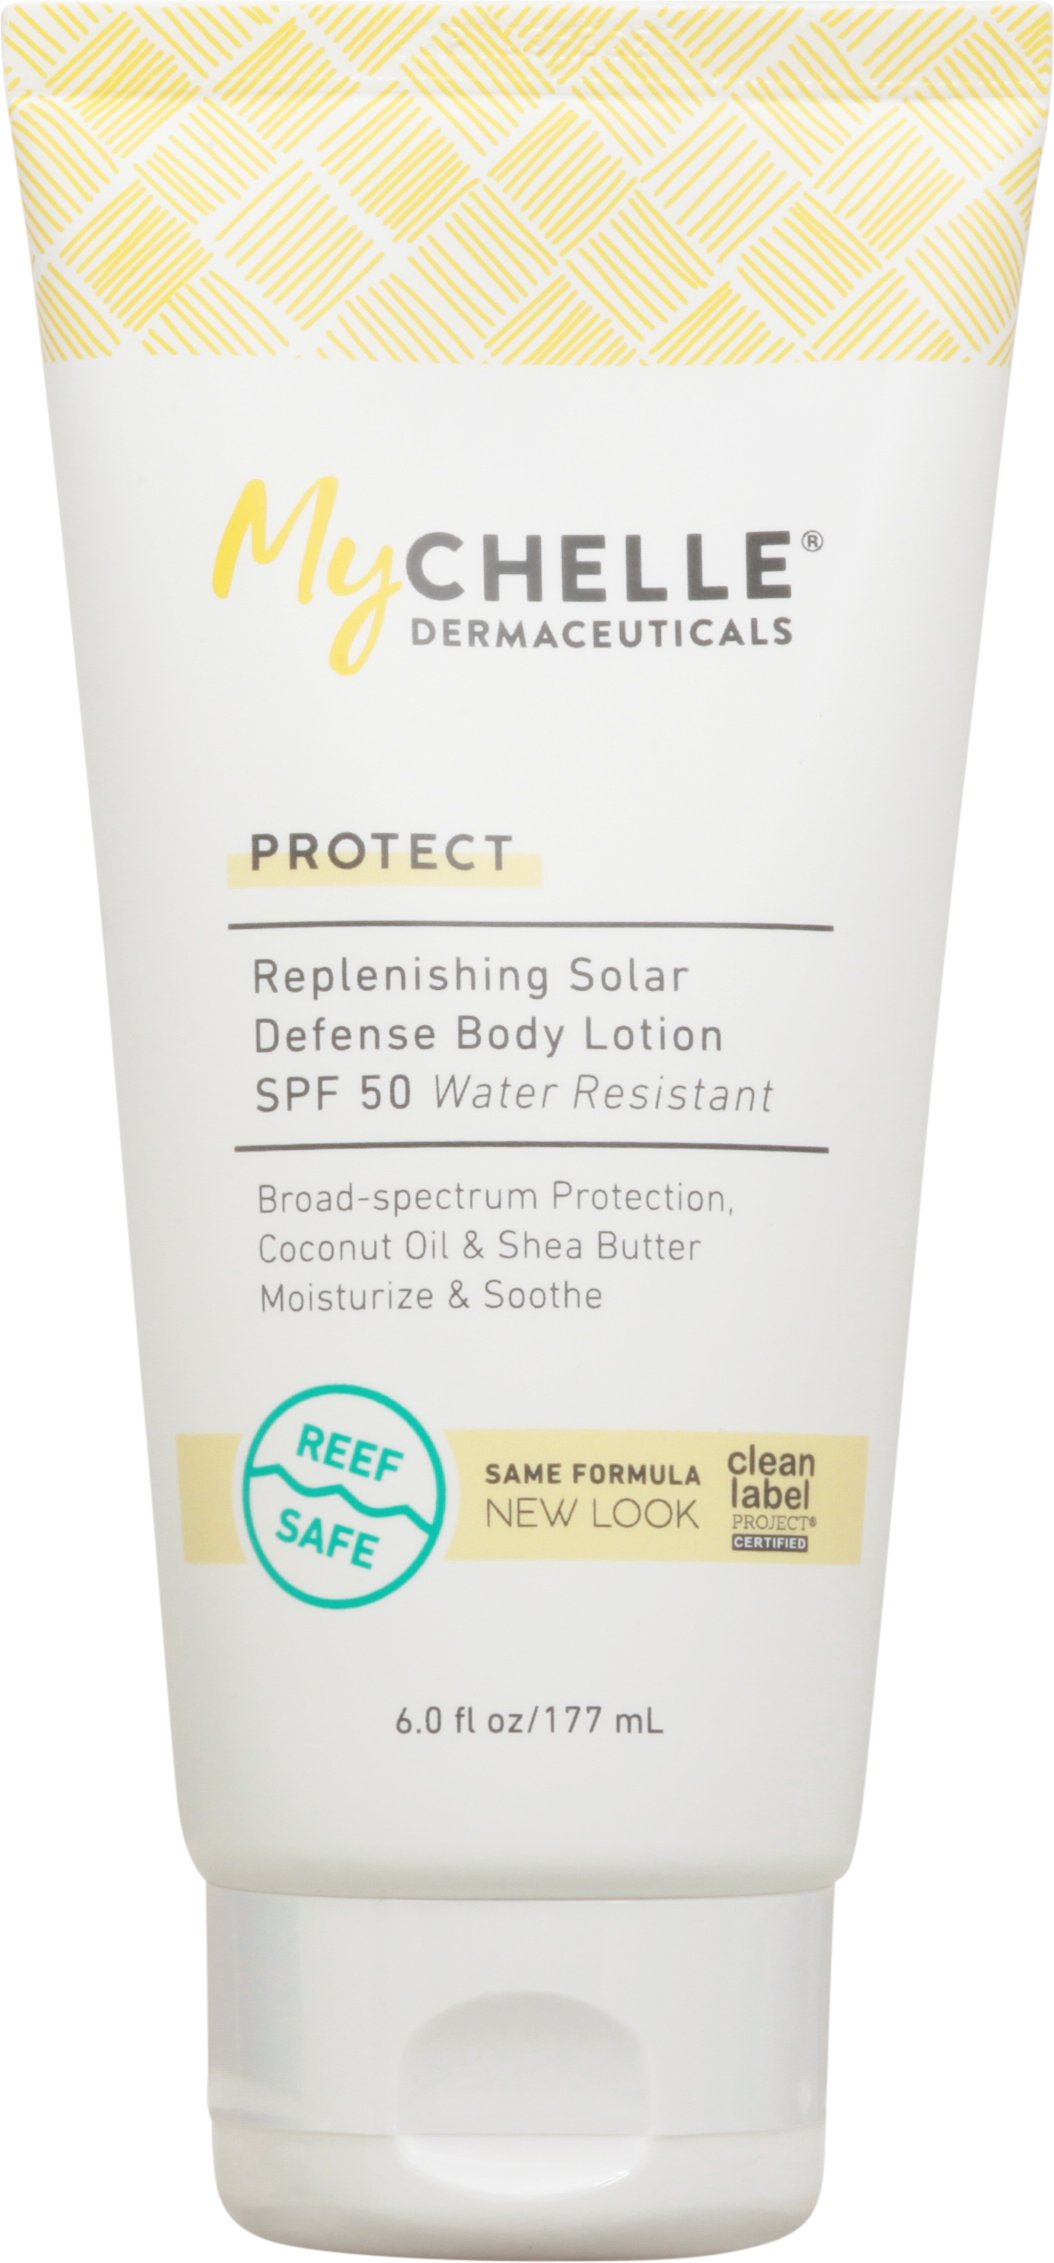 Mychelle Dermaceuticals B08407 6 oz Replenishing Solar Defense Body Lotion with SPF 50 - image 2 of 3